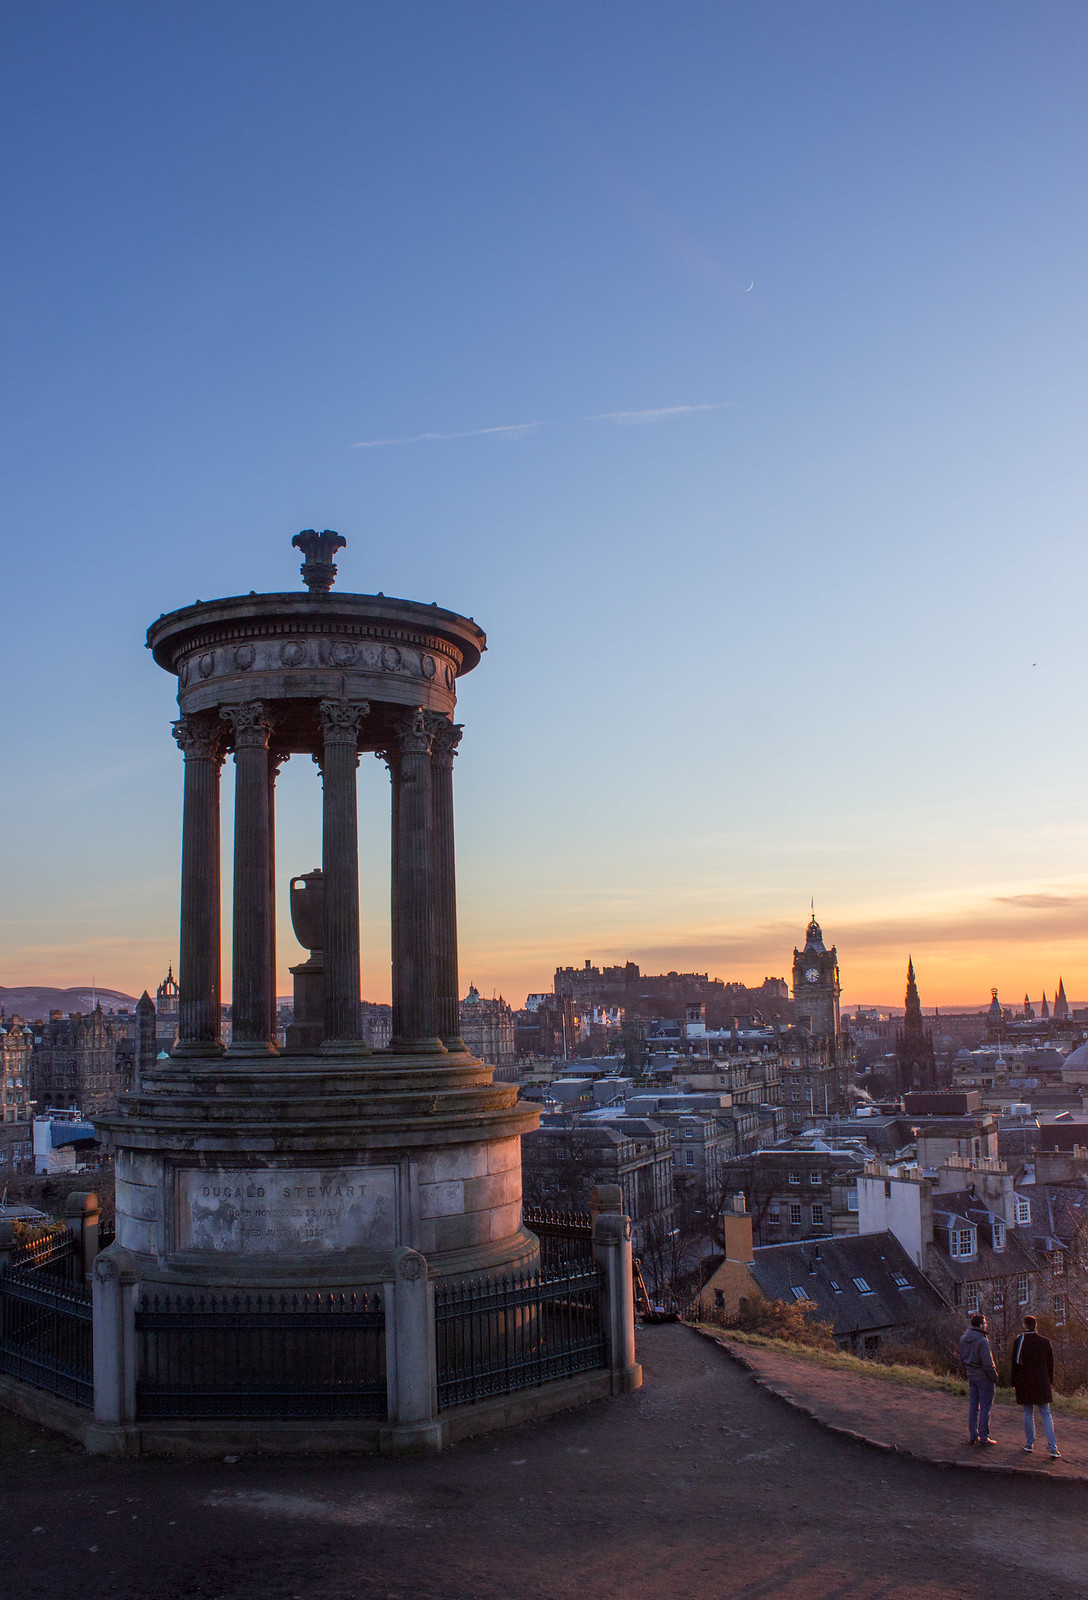 Watching the sunset over Edinburgh from Calton Hill